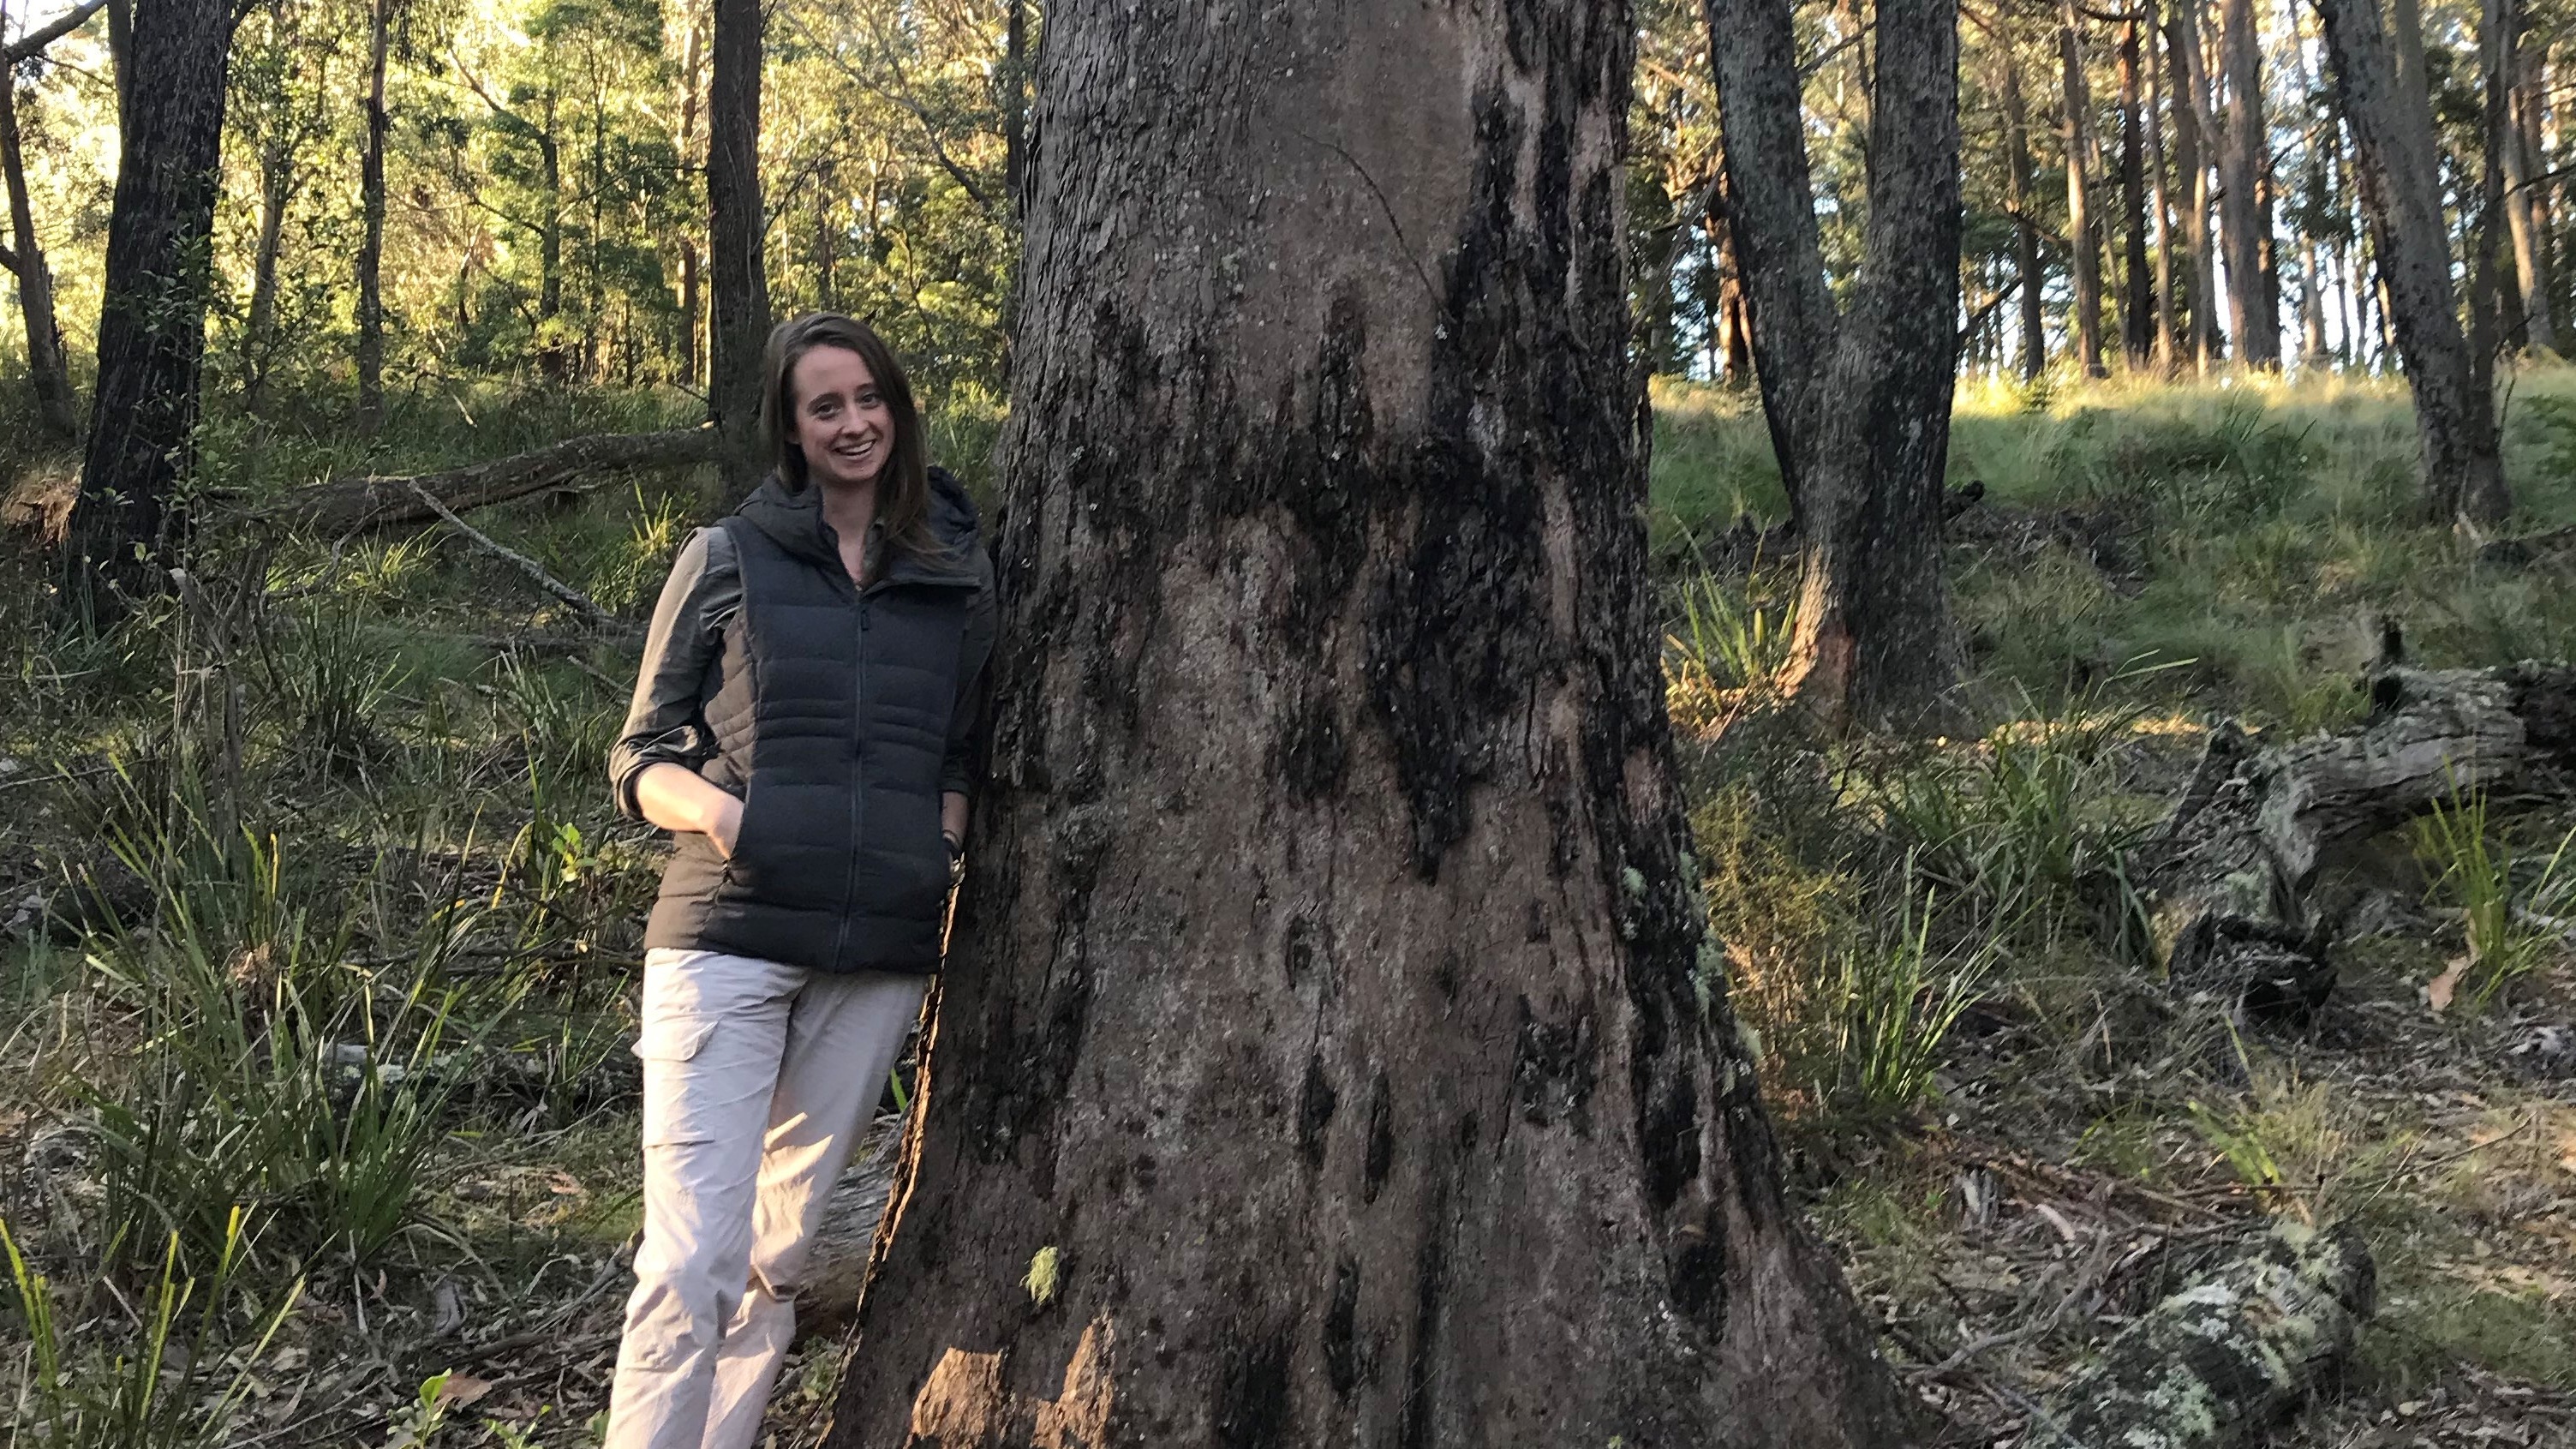 Sarah standing beside an old, massive tree